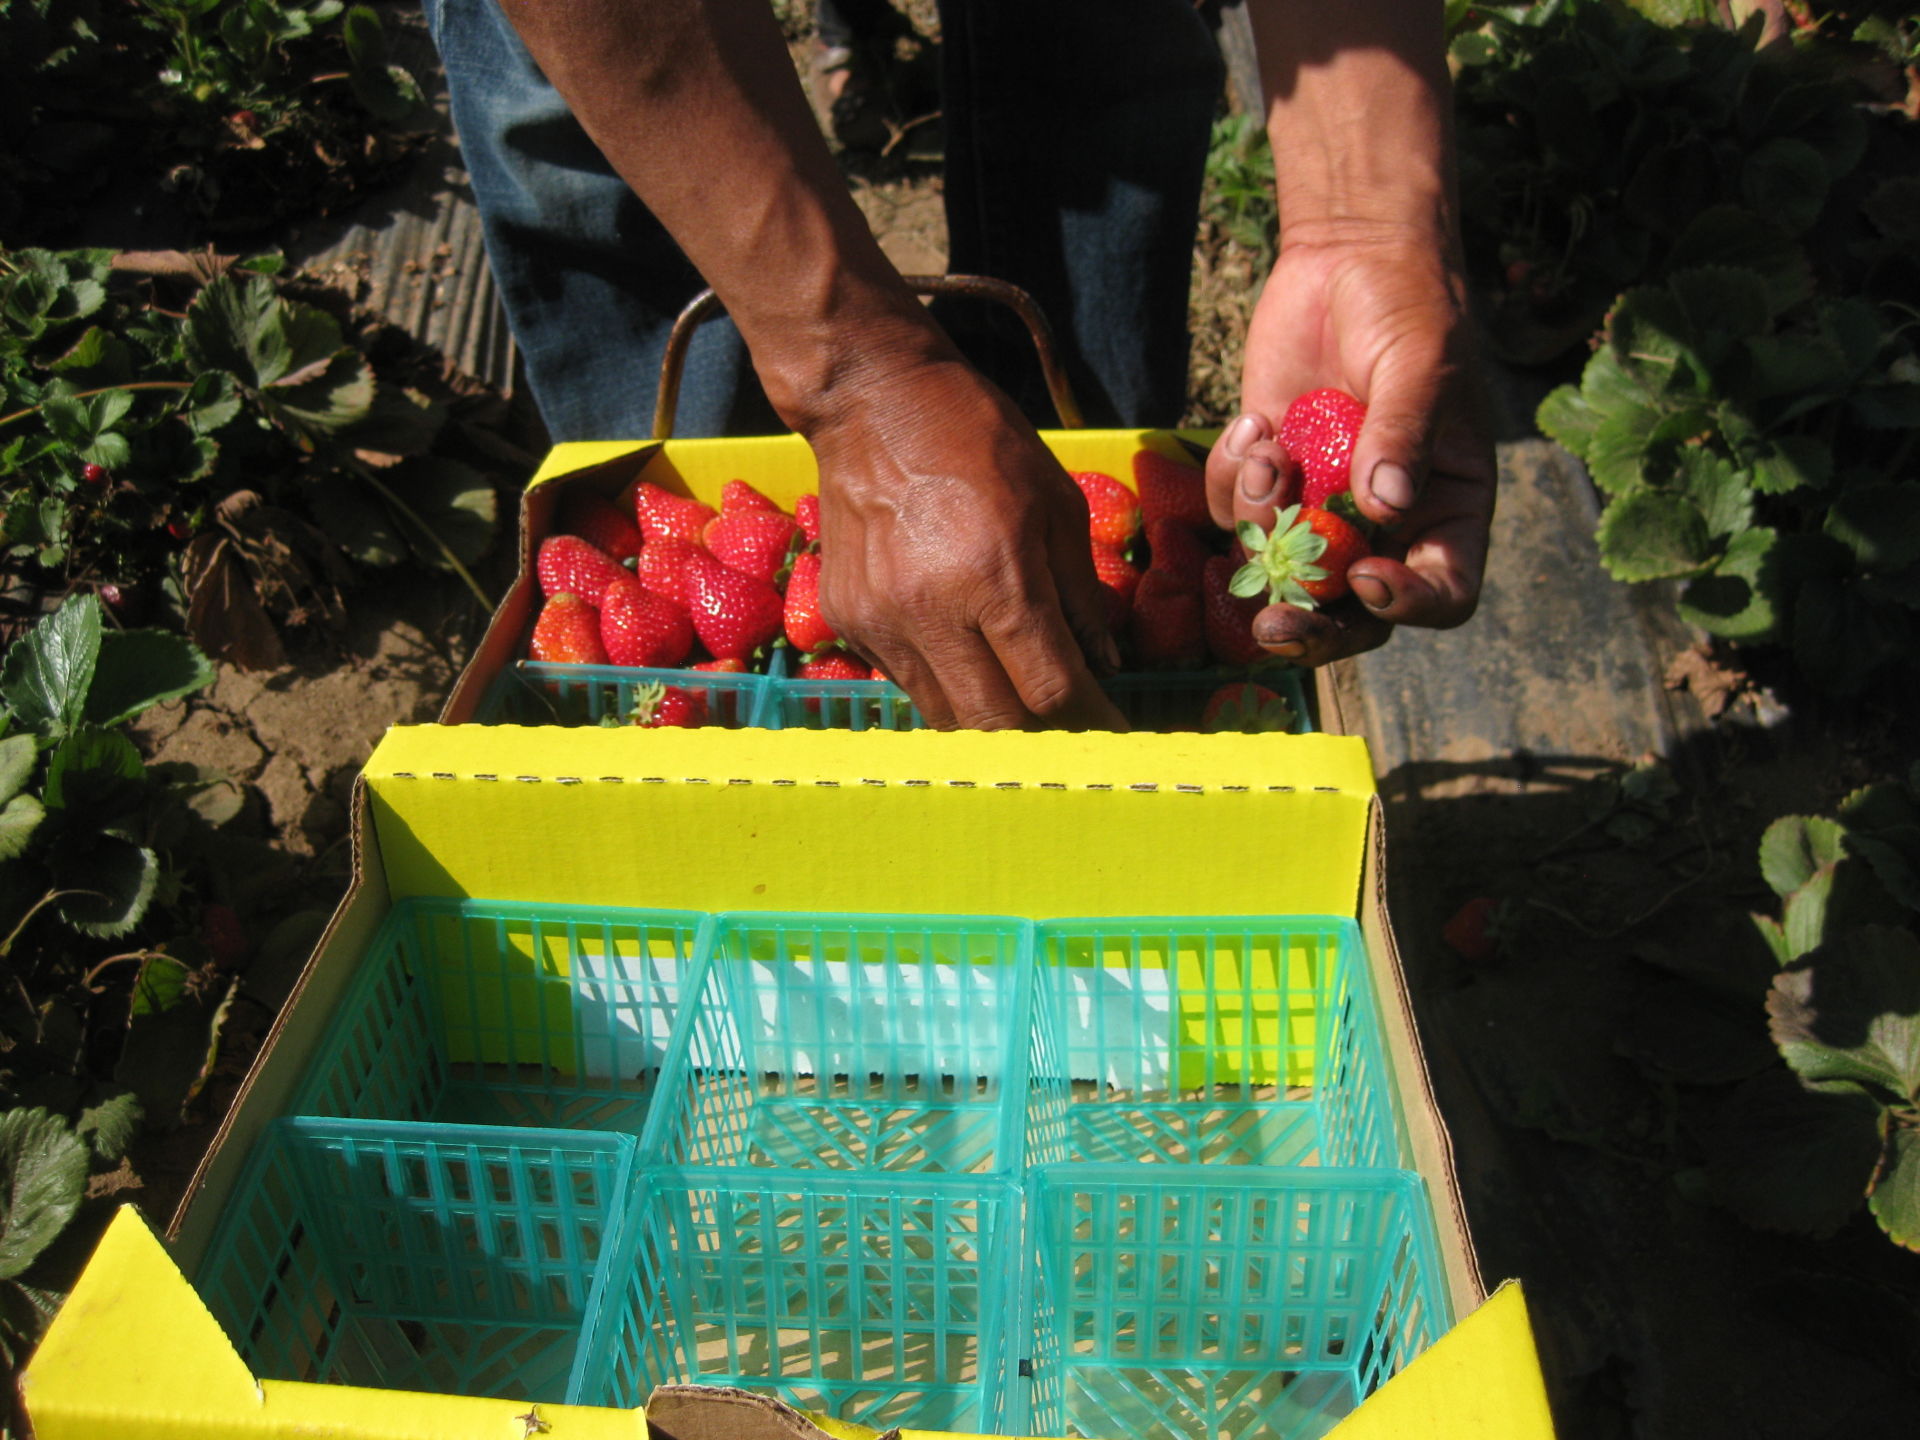 A field worker fills a box of strawberries in Watsonville, Calif. Berry pickers say they're earning less money this year. Because of the drought, there's less fruit to pick, and the fruit that is there is smaller, which means it takes longer to fill a box. Pickers are paid by the box.